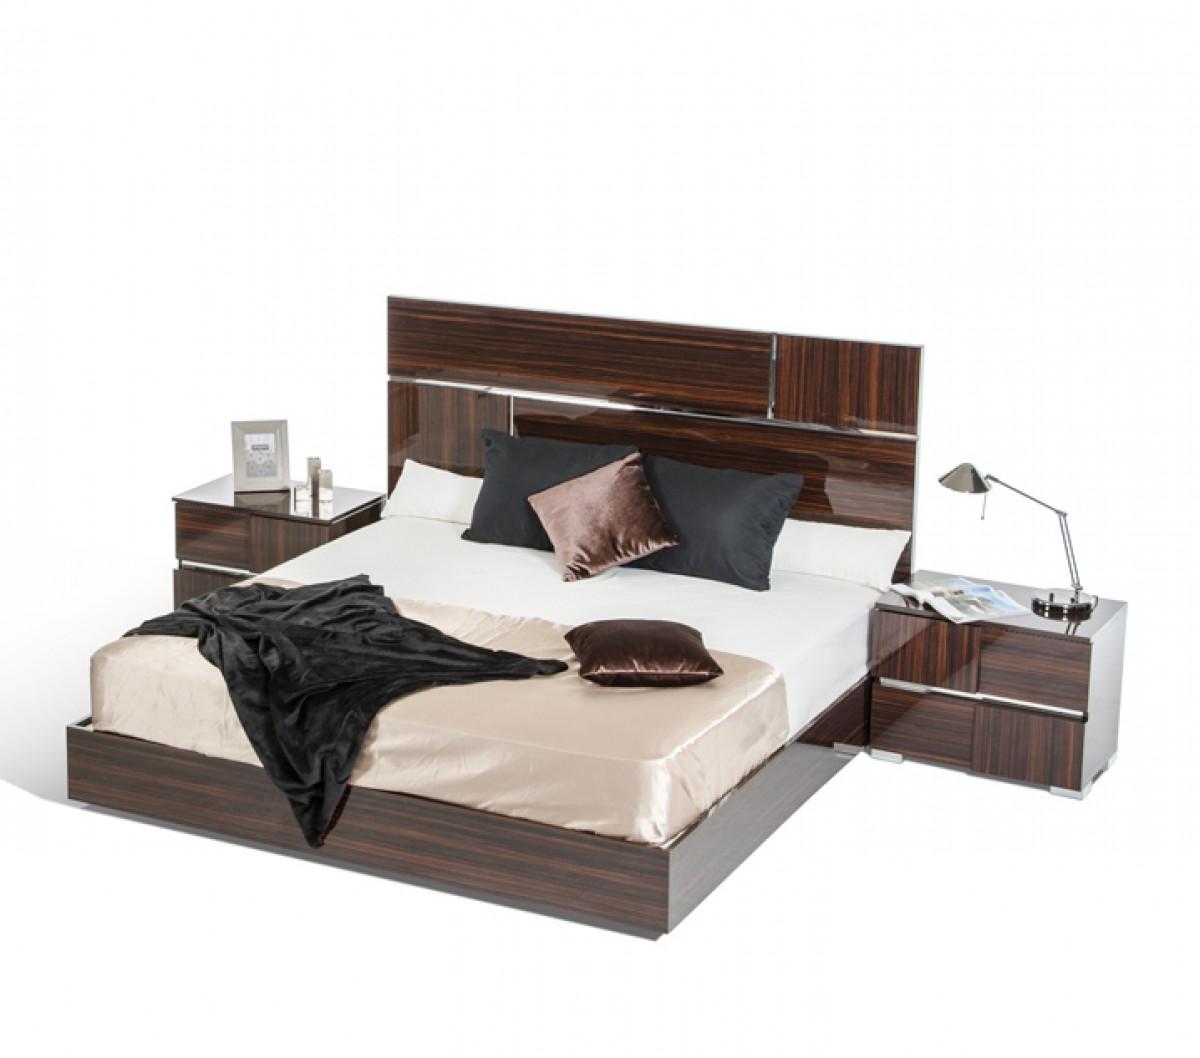 

    
VIG Modrest Picasso Ebony Lacquer Finish Cal King Bedroom Set 5Pcs Made In Italy
